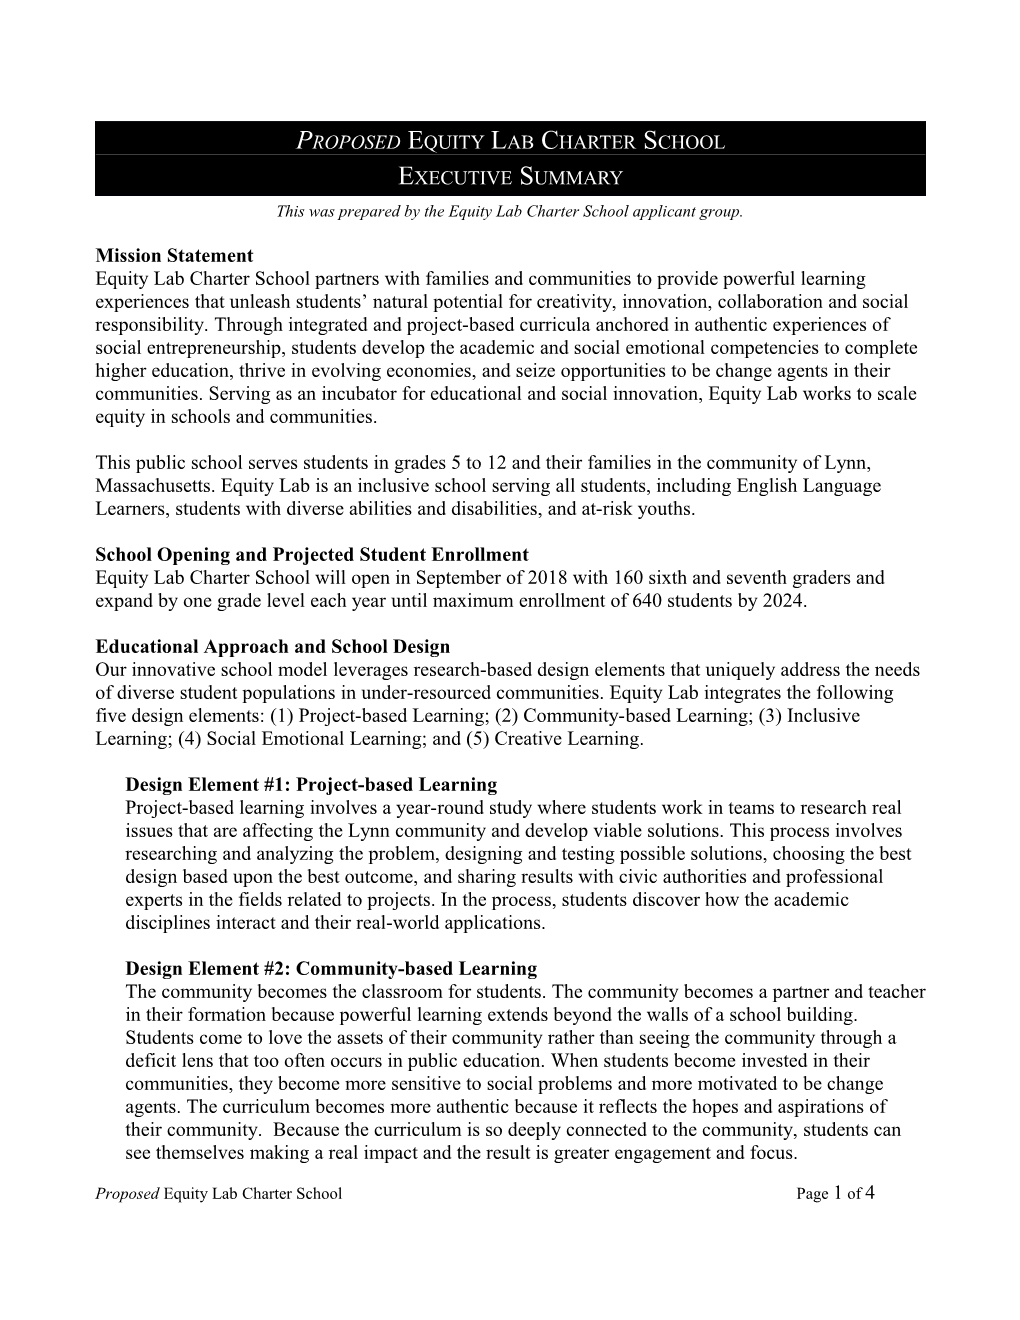 Executive Summary of Proposed Equity Lab Charter School